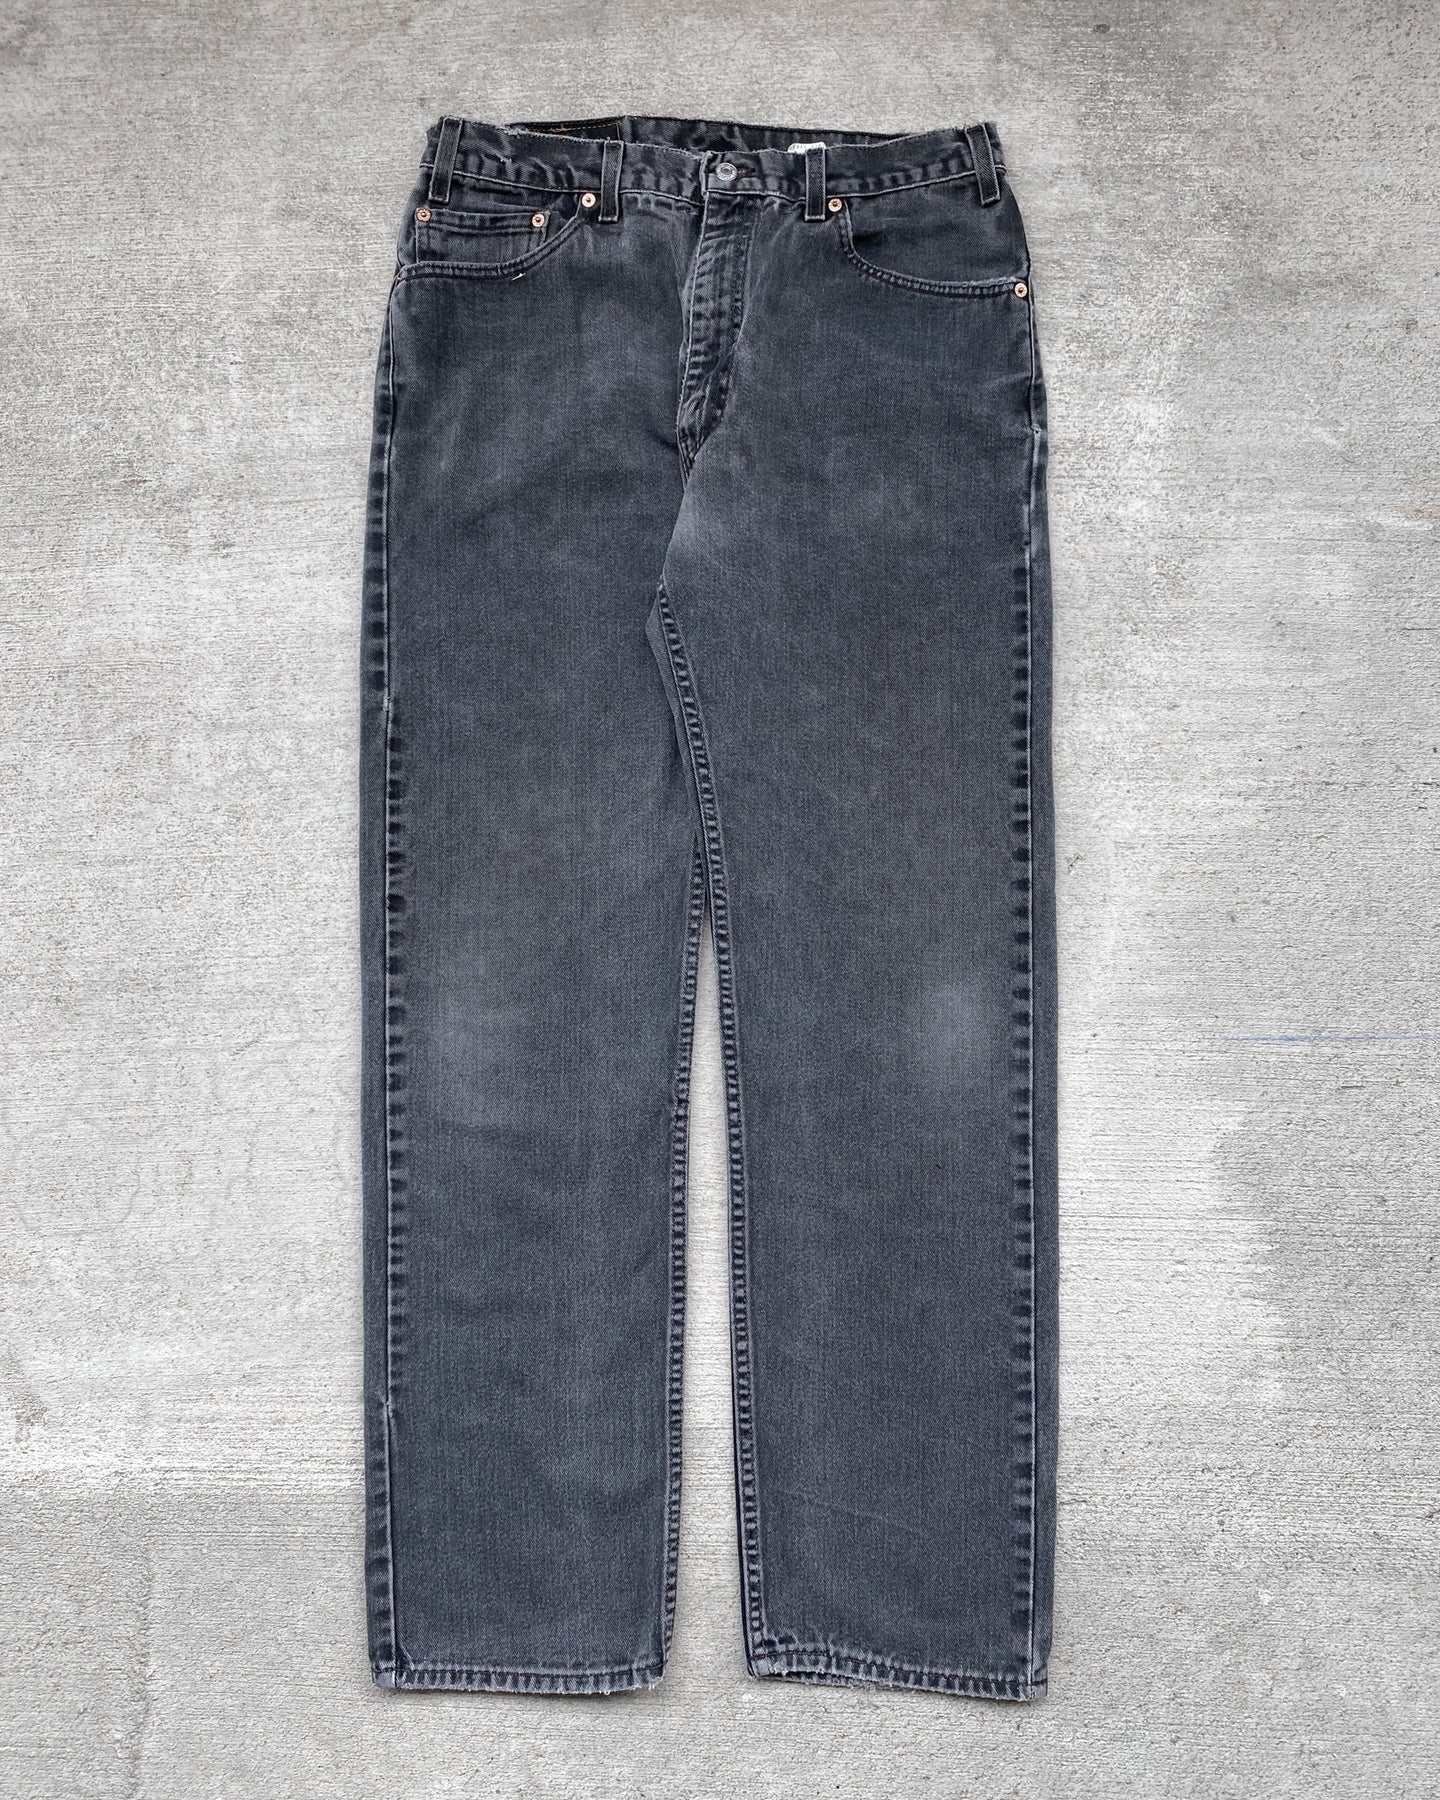 1990s Levi's Worn and Faded Charcoal 505 - Size 34 x 32